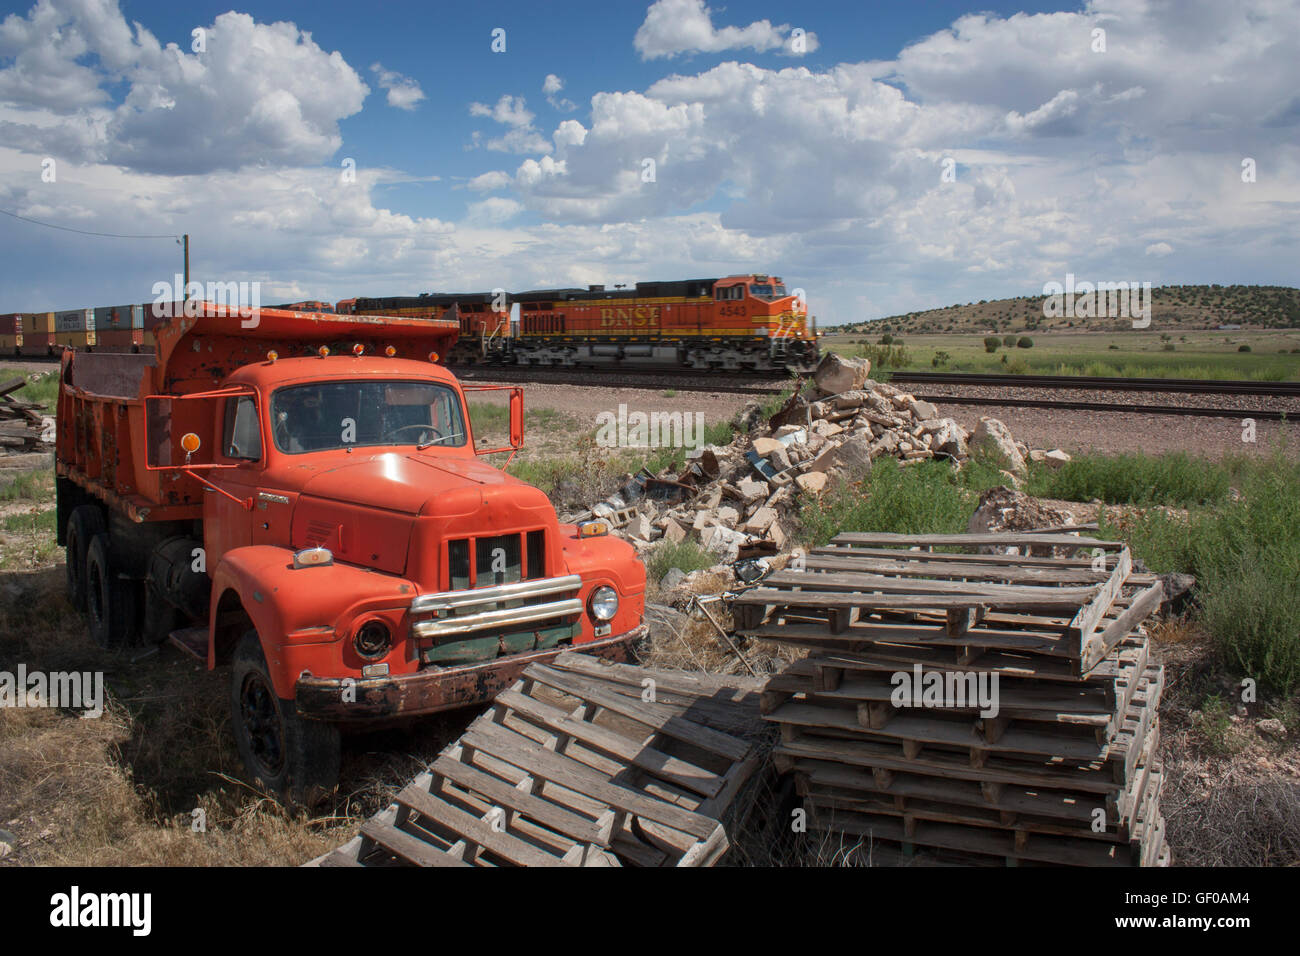 1954 International Harvester tipper truck R190 with pallets and train speeding past in background Stock Photo